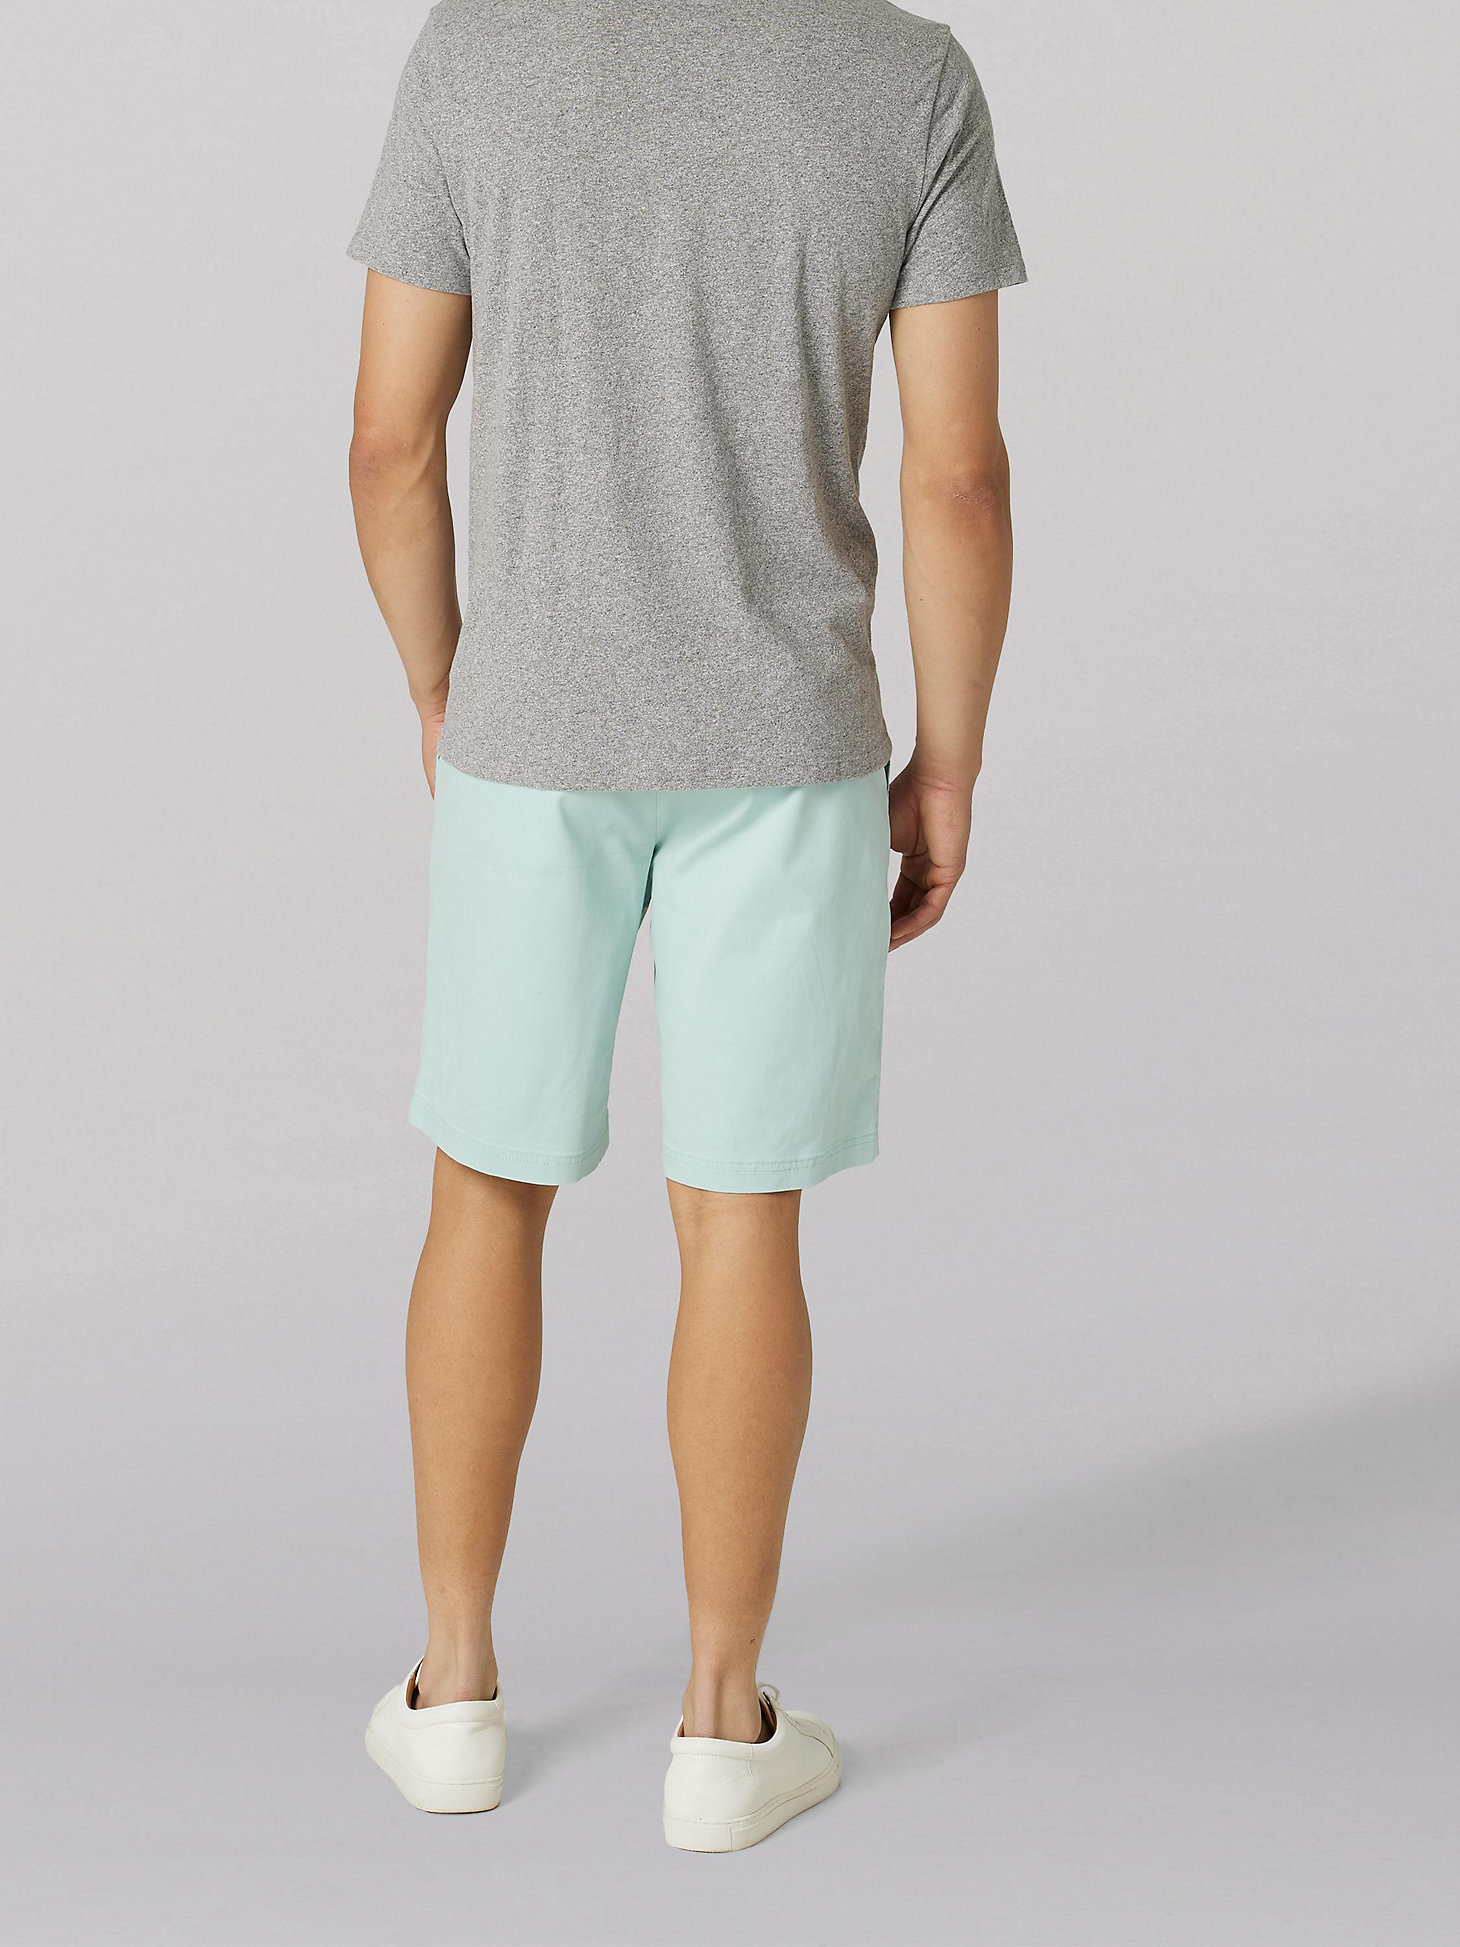 Men's Extreme Comfort Flat Front Short in Sea Green alternative view 1